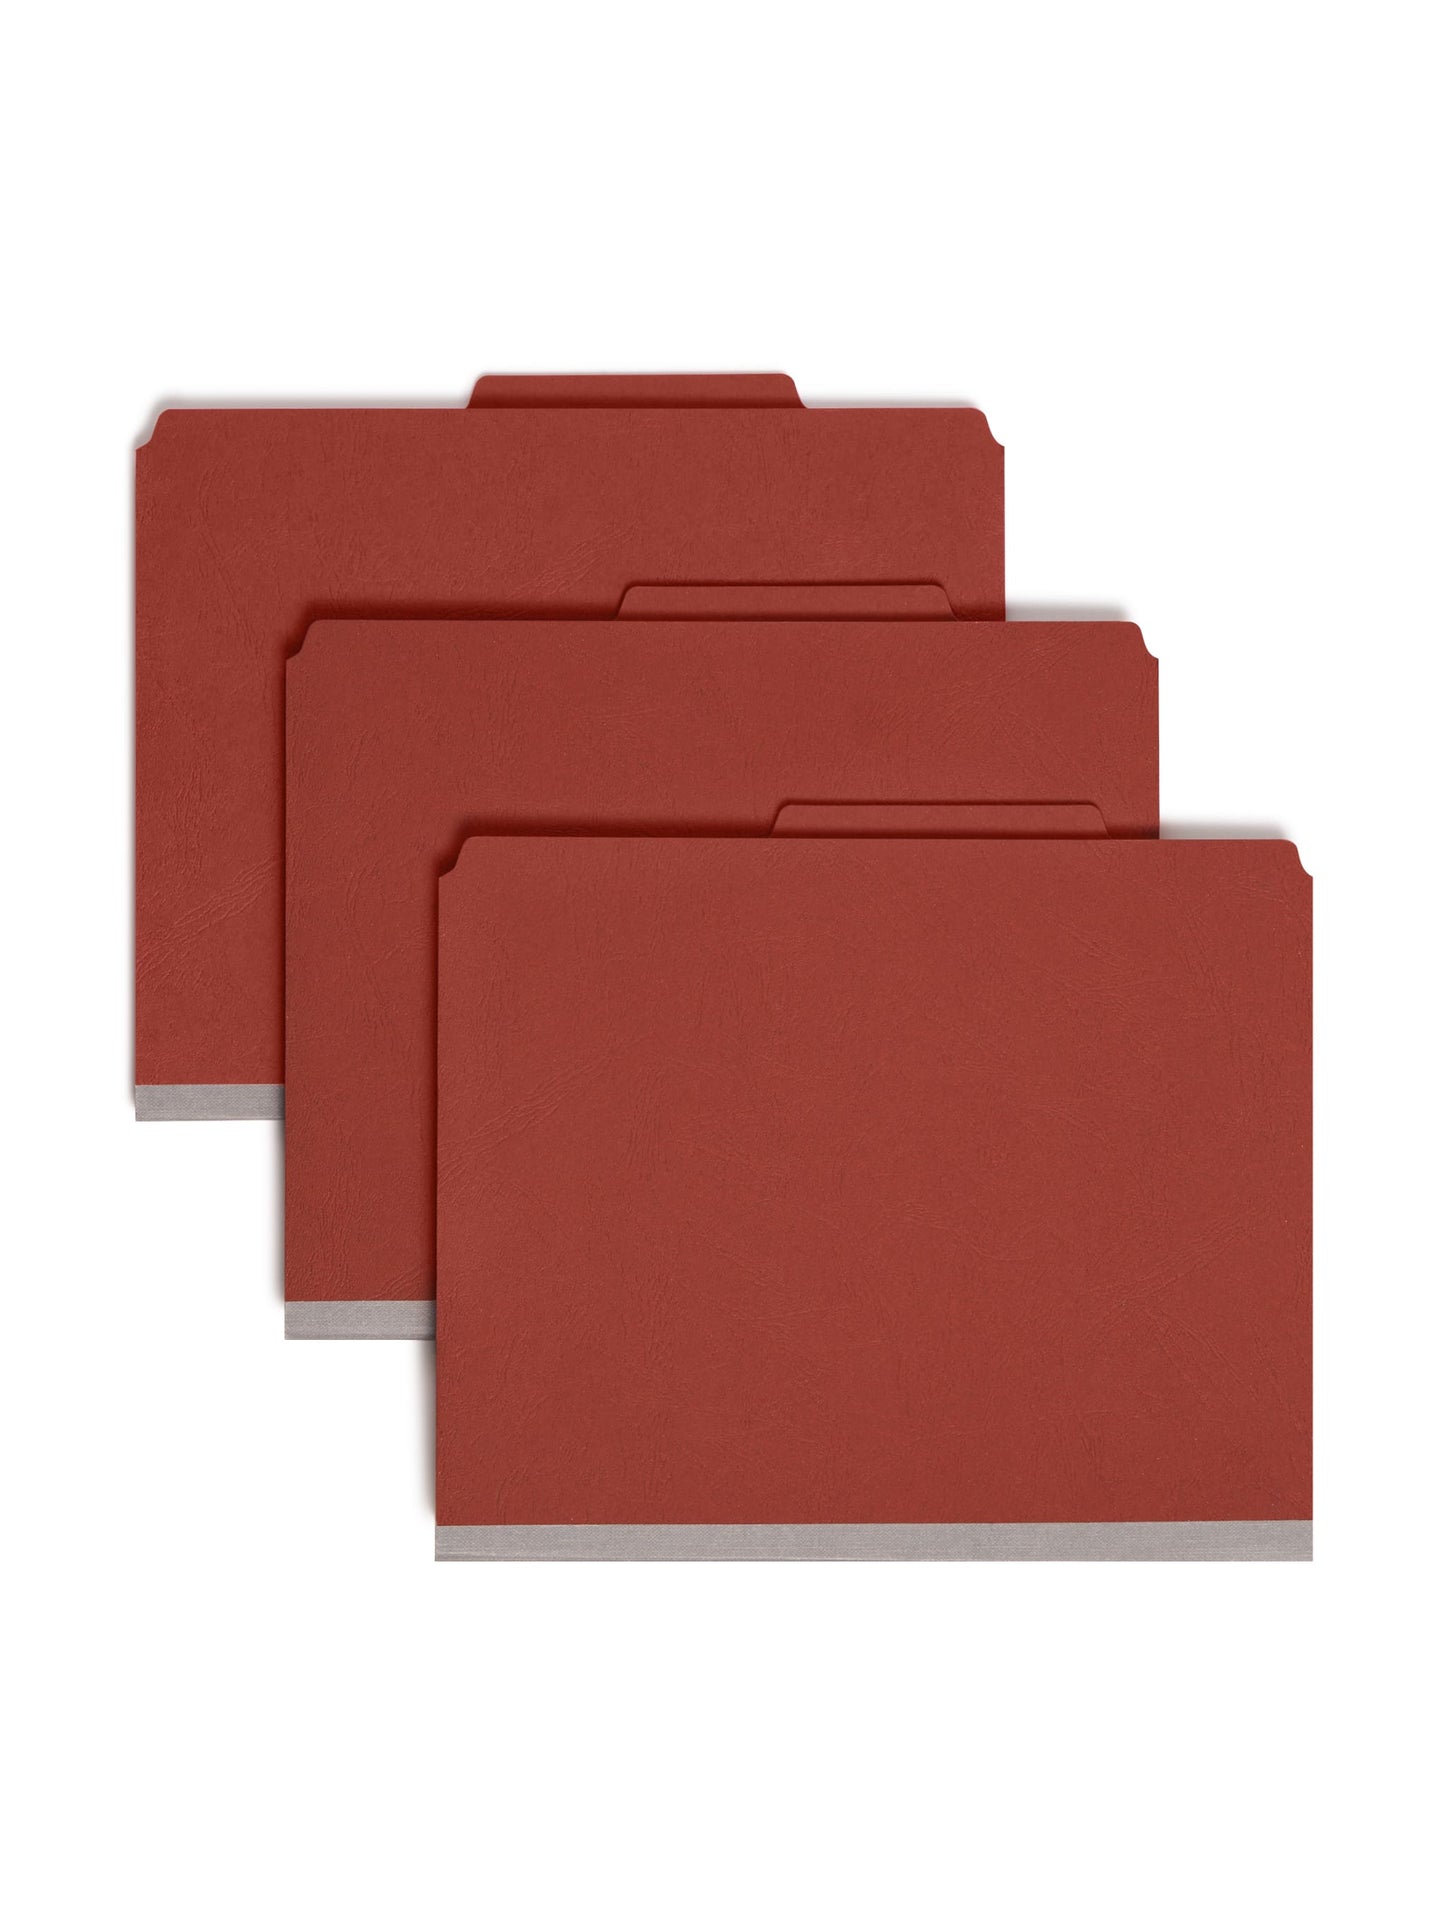 SafeSHIELD® Premium Pressboard Classification File Folders, 2 Dividers, 2 inch Expansion, 2/5-Cut Tab, Red Color, Letter Size, Set of 0, 30086486142053